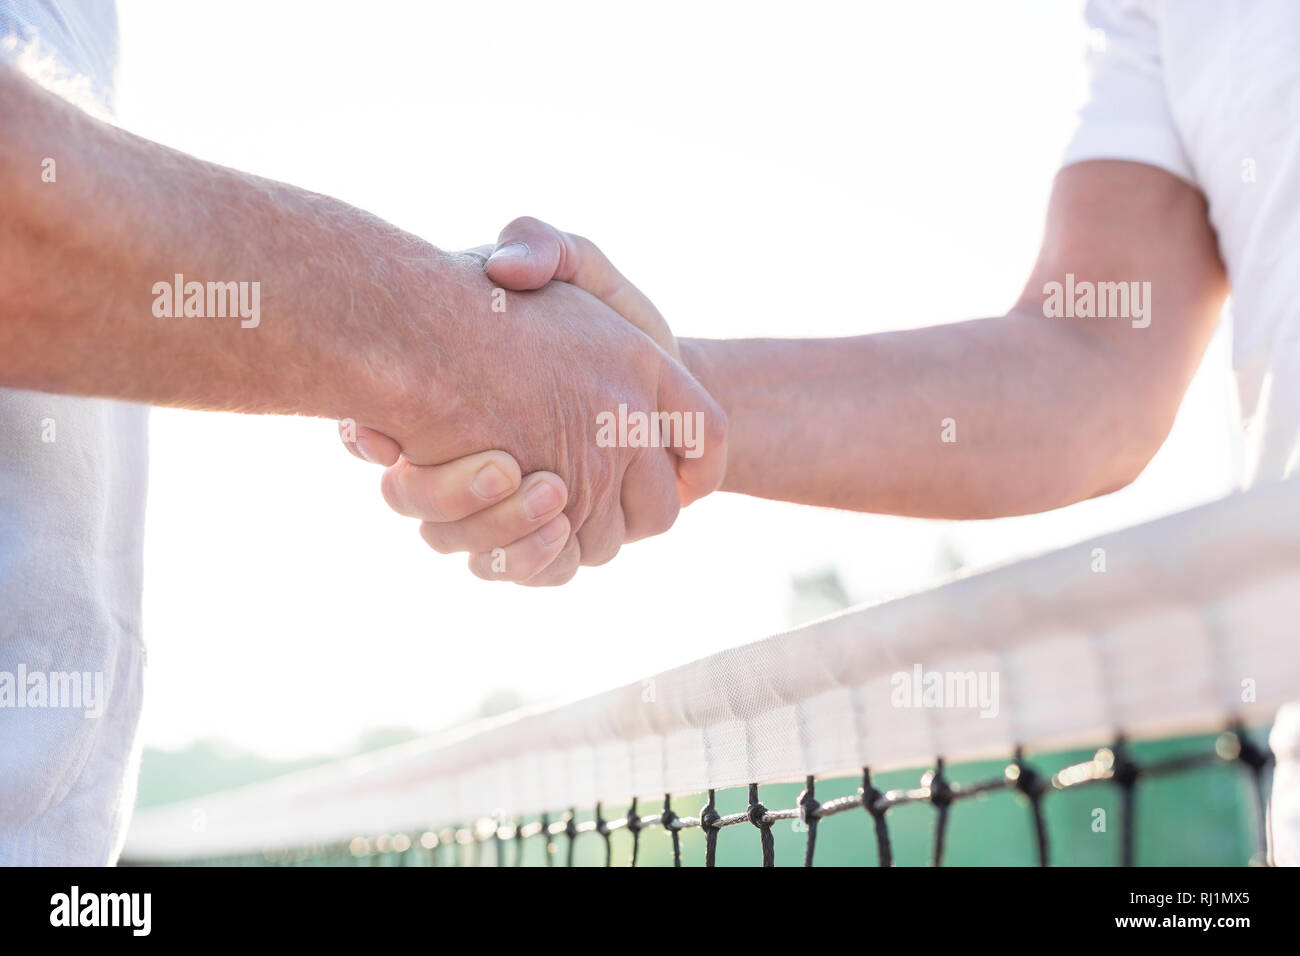 Midsection of men shaking hands while standing at tennis court against clear sky Stock Photo